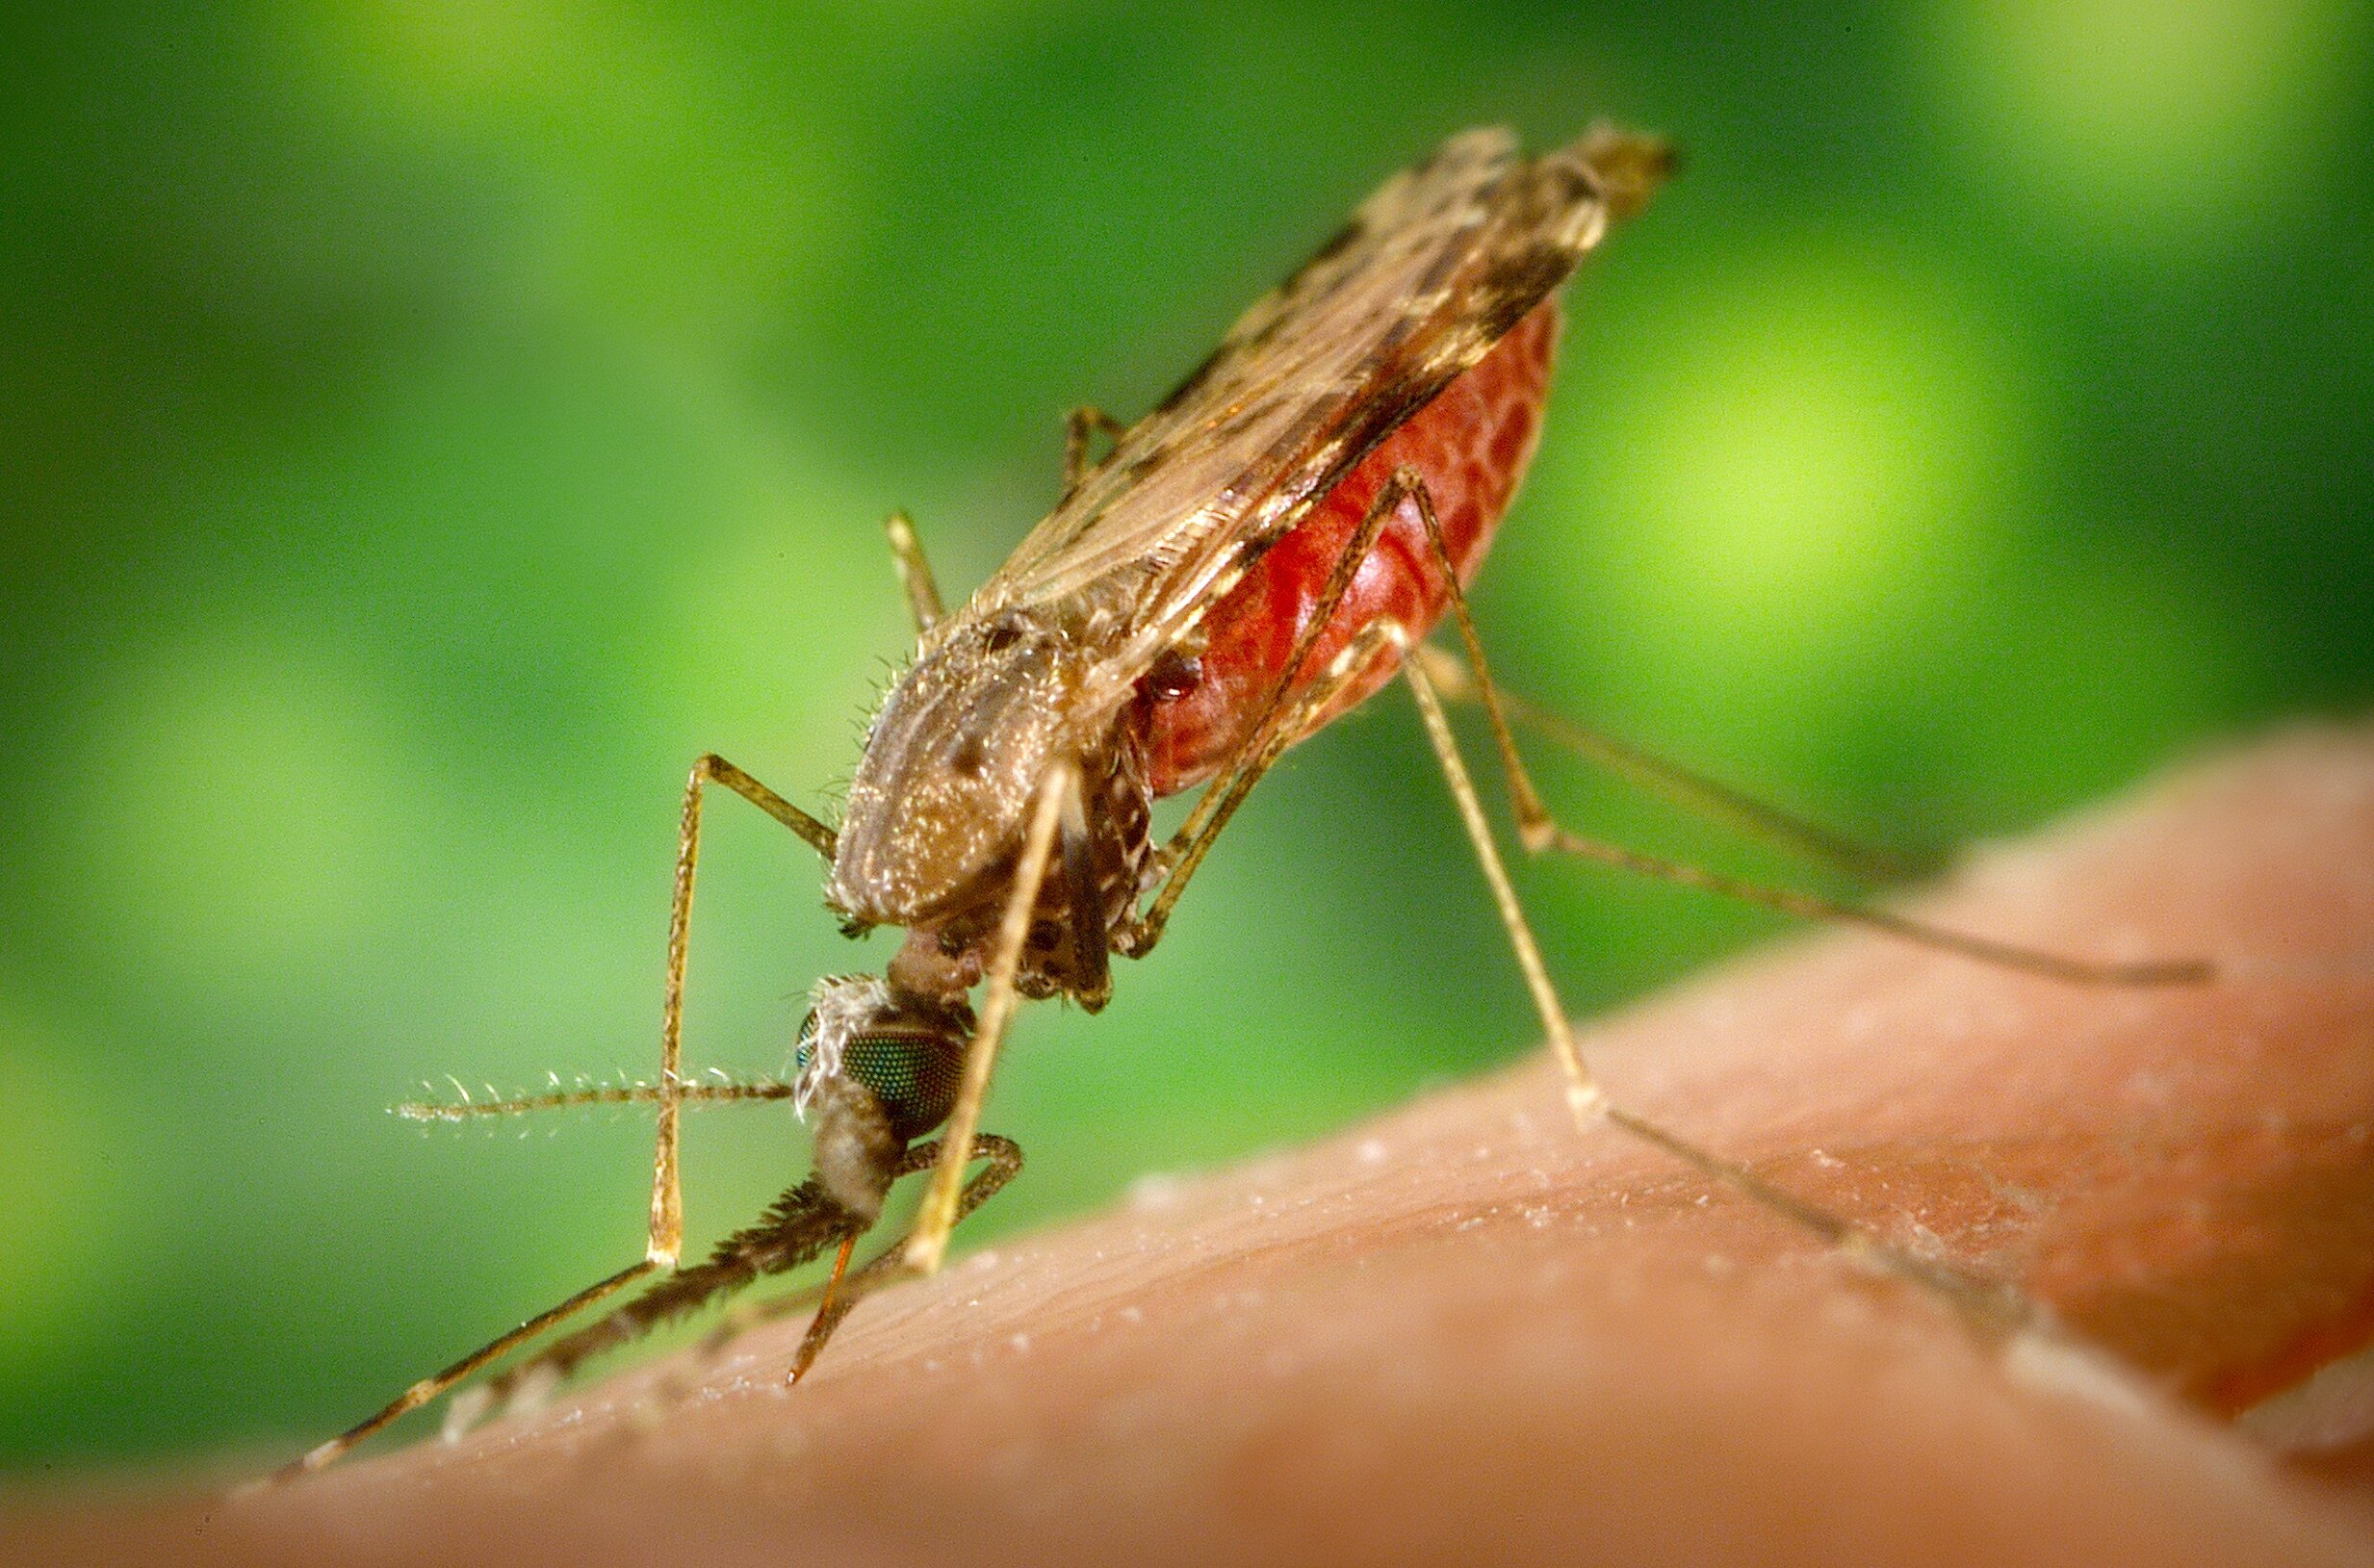 Geoengineering could return risk of malaria for one billion people